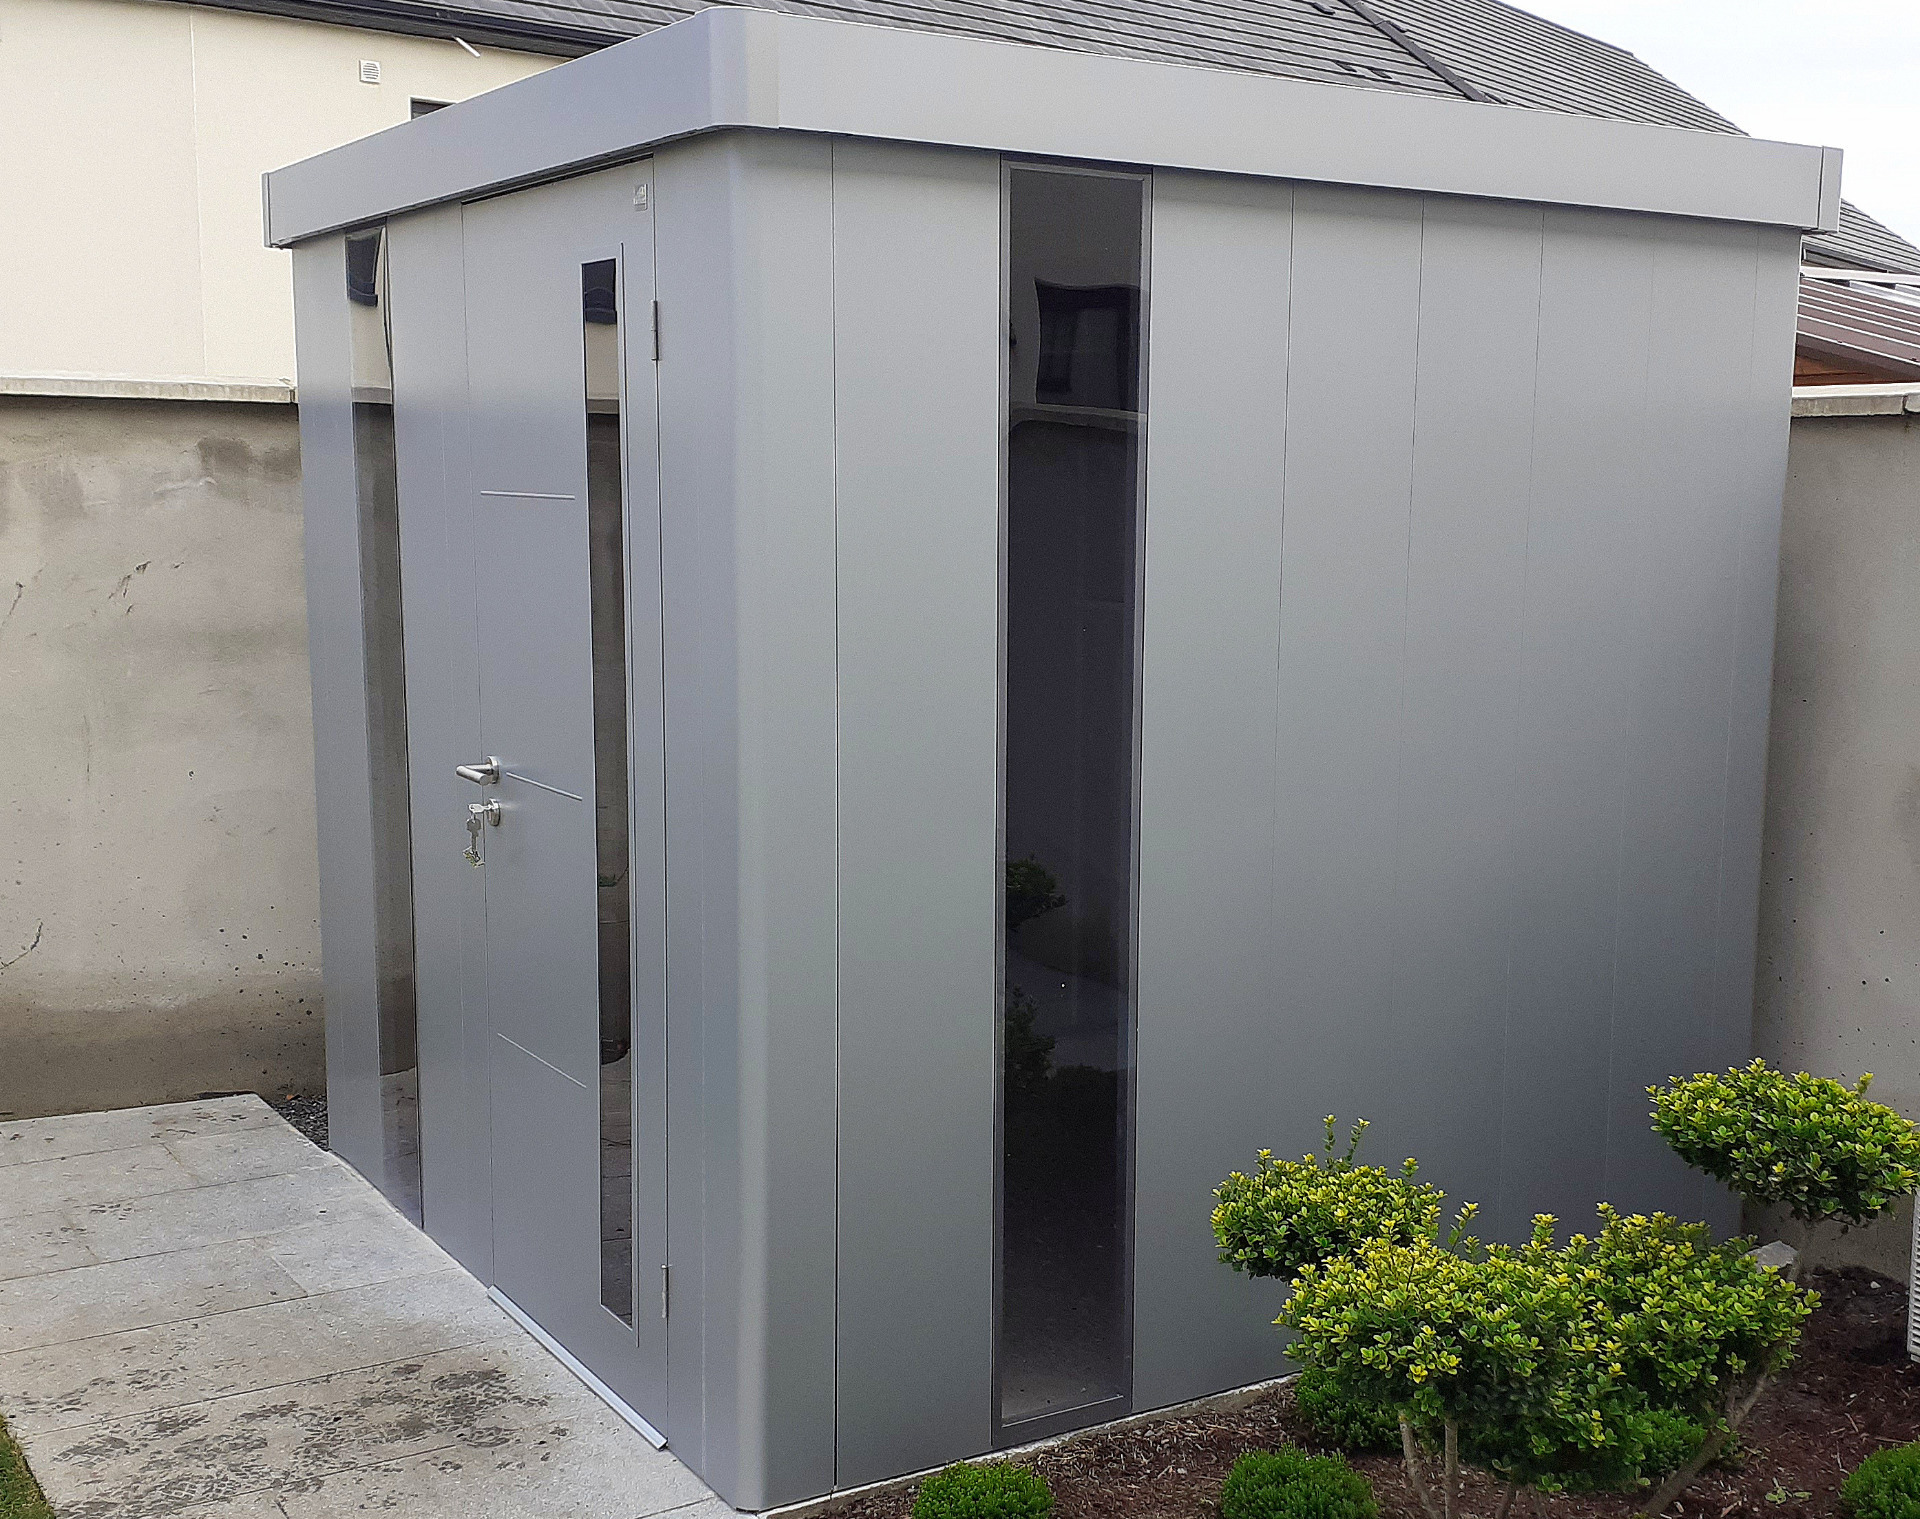 Biohort NEO 2B Garden Shed  in metallic silver | Supplied + Fitted in Portmarnock, Dublin  13  by Owen Chubb Landscapers, Ireland's # 1 Supplier & Installer of Biohort Garden Sheds & Storage Solutions